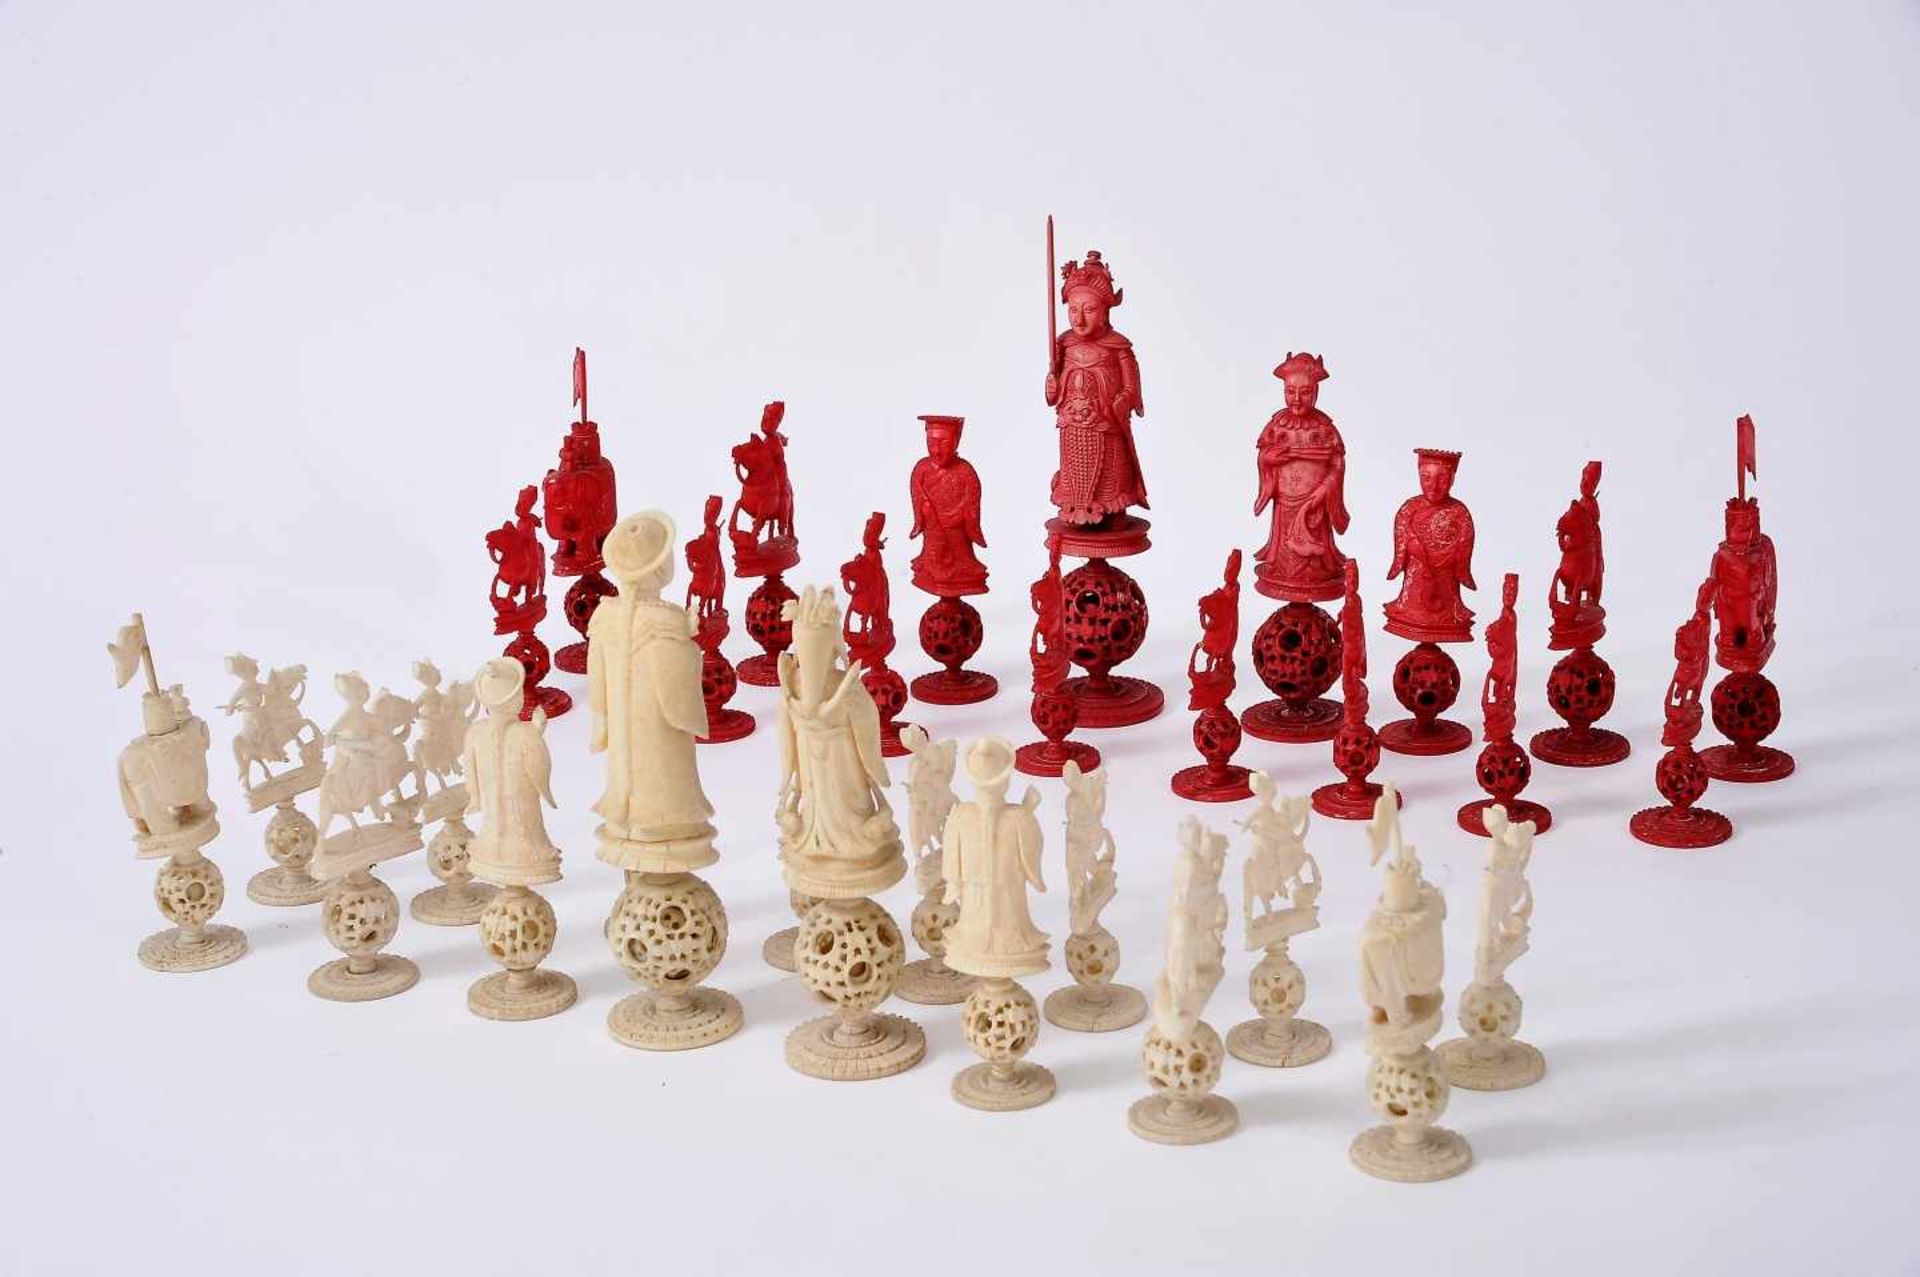 Chess PiecesChess Pieces, carved ivory with all the pieces based on "Ball of happiness", one of